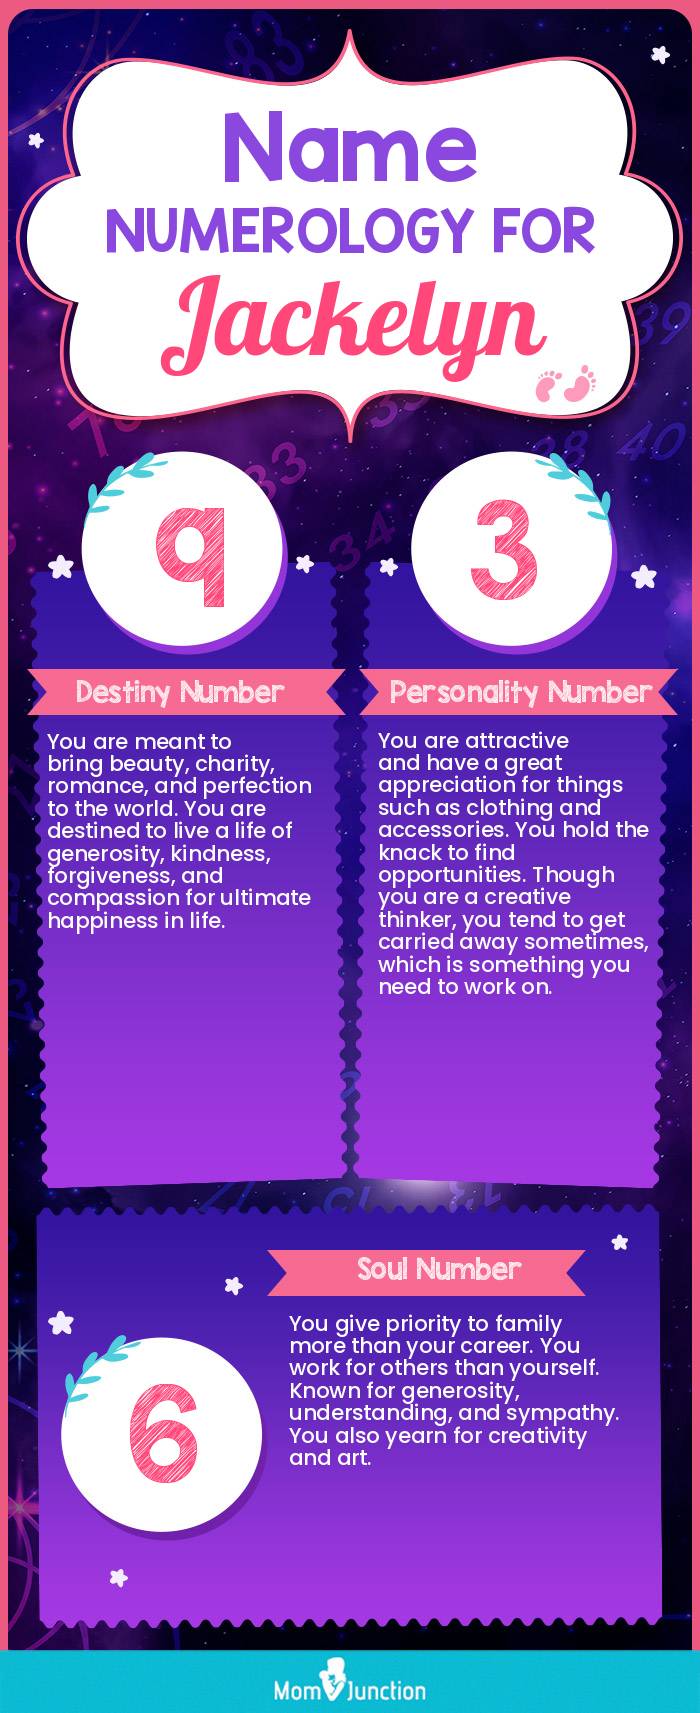 name-numerology-for-jackelyn-girl